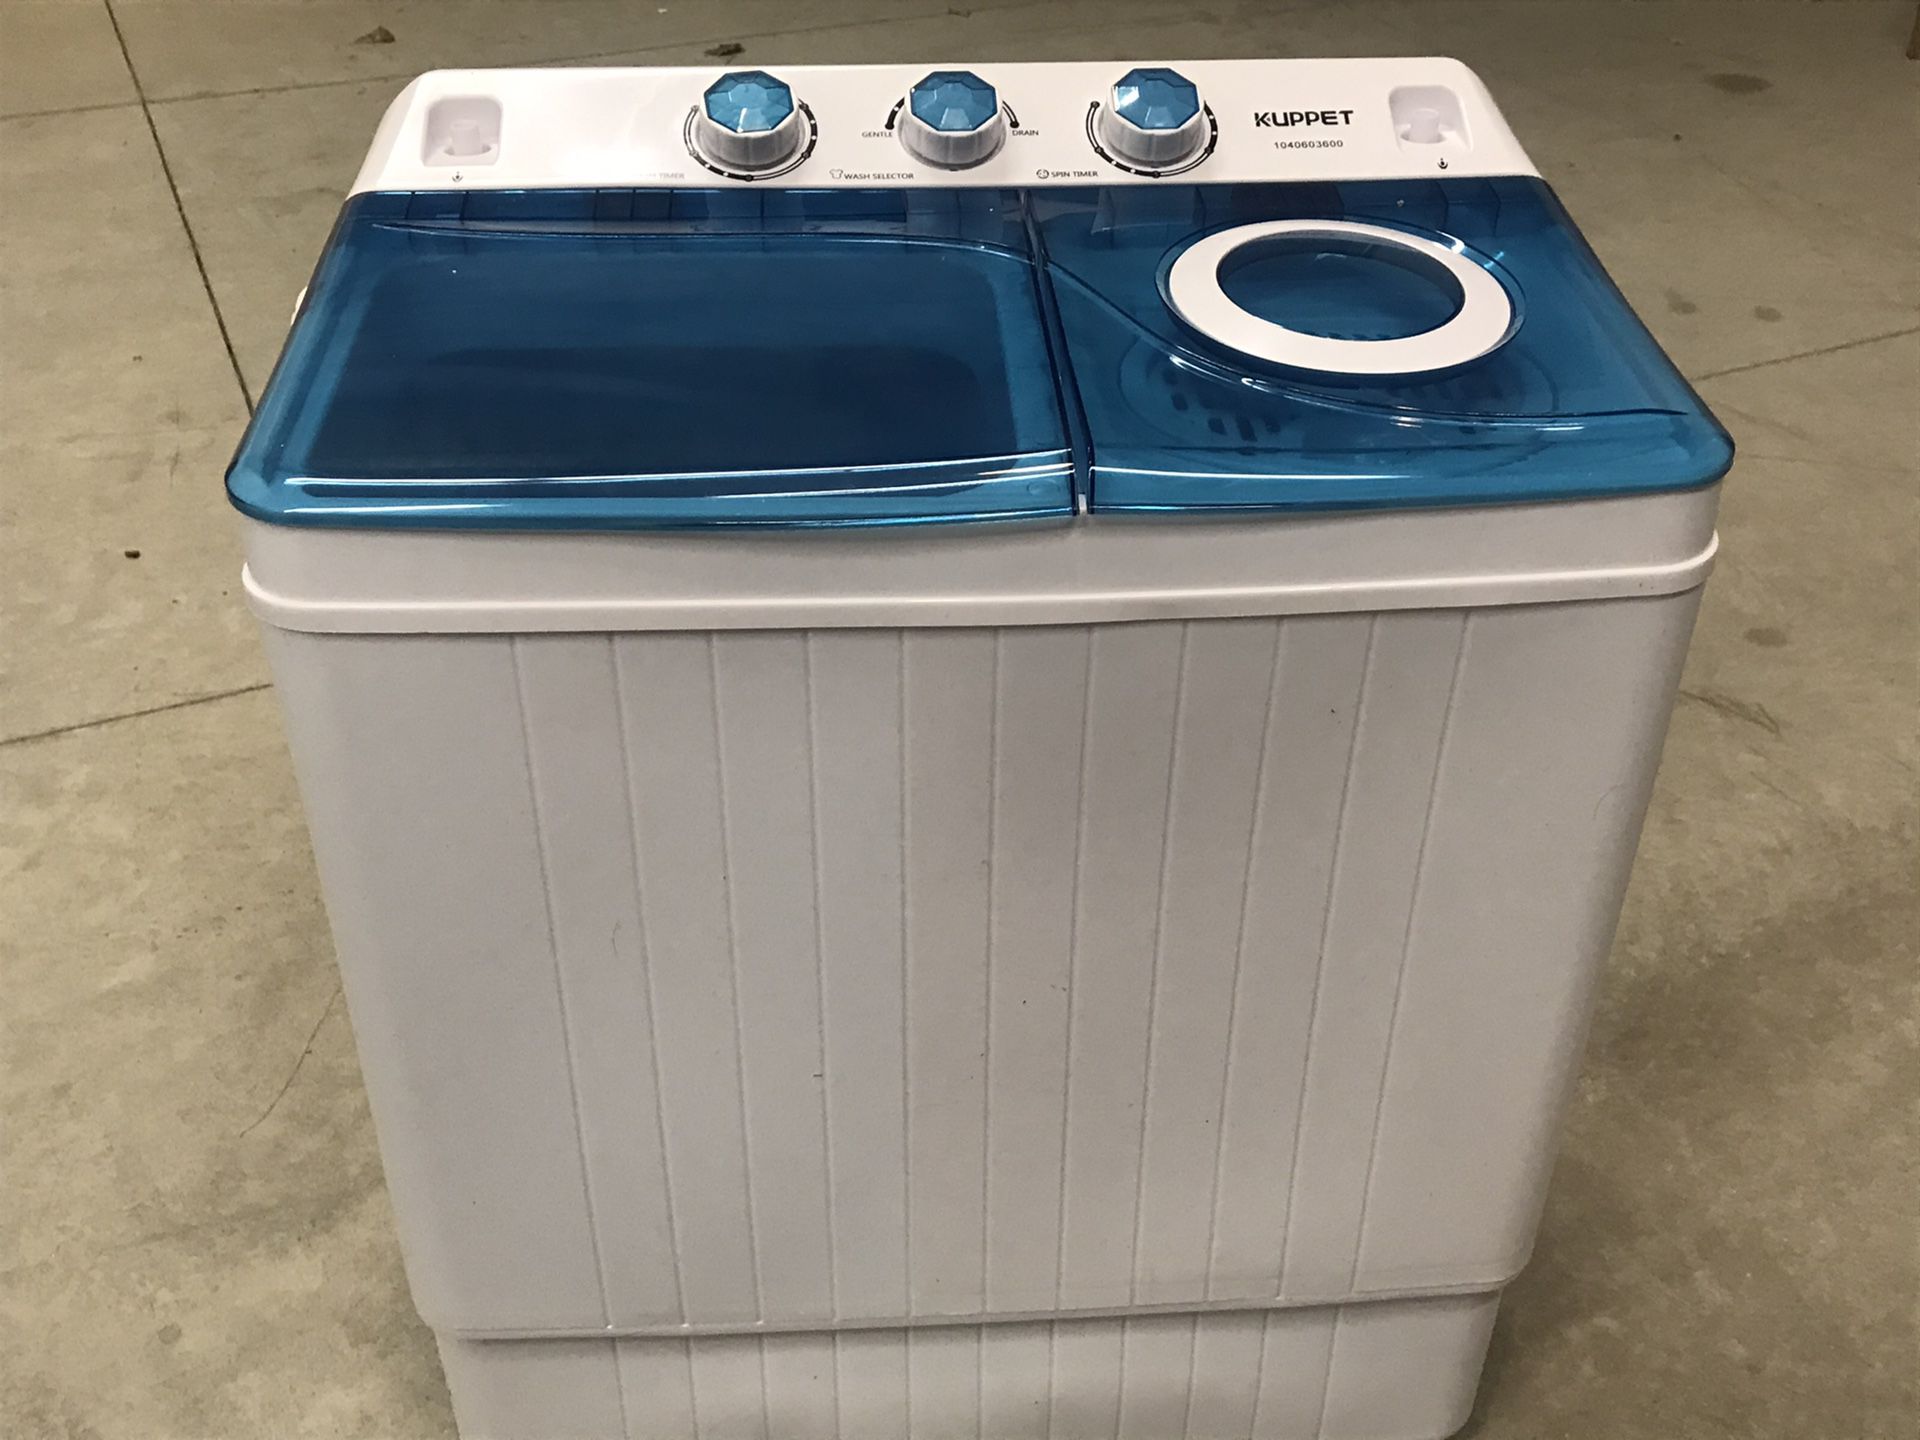 KUPPET PORTABLE WASHING MACHINE for Sale in New York, NY - OfferUp